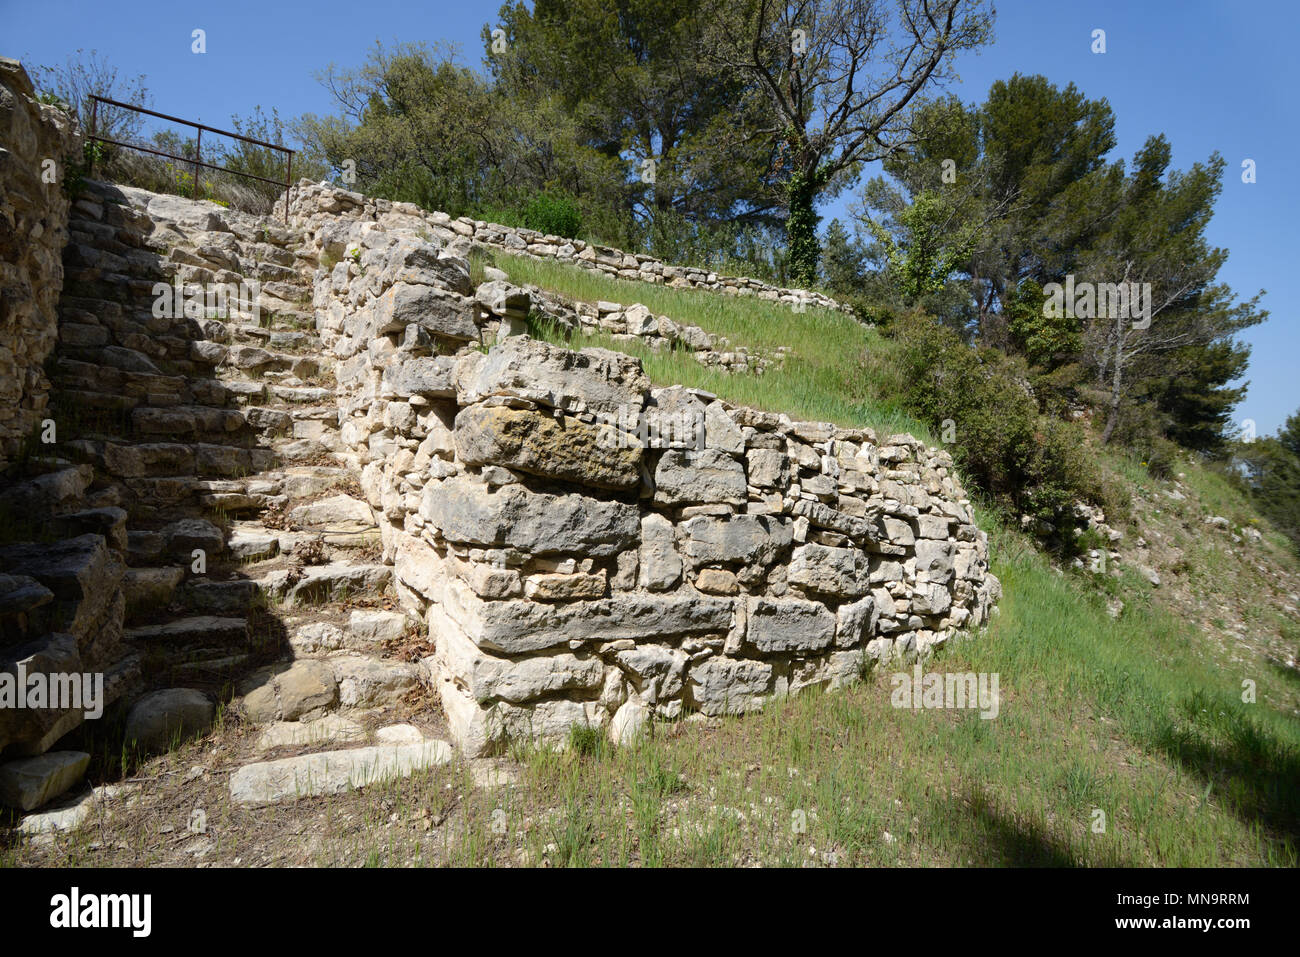 South East Poterne or Entrance & Town Walls or Ramparts of Pre-Roman Gallic Town or Oppidum of Entremont (180-170BC) Aix-en-Provence Provence France Stock Photo